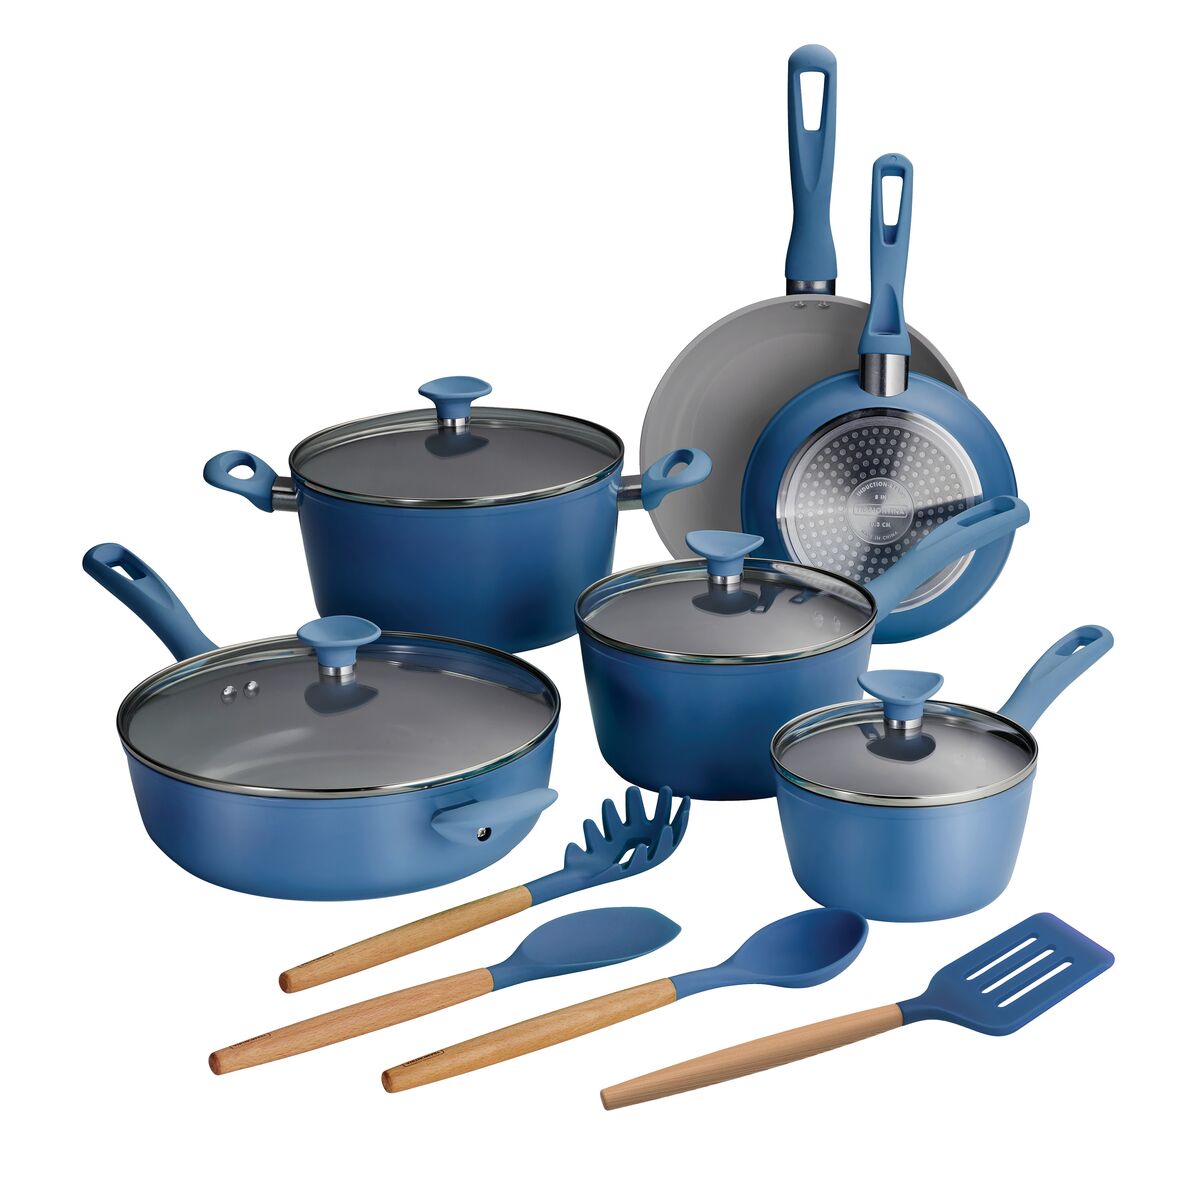 14 Pc Ceramic Induction-Ready Cookware Set - Blue - Tramontina US